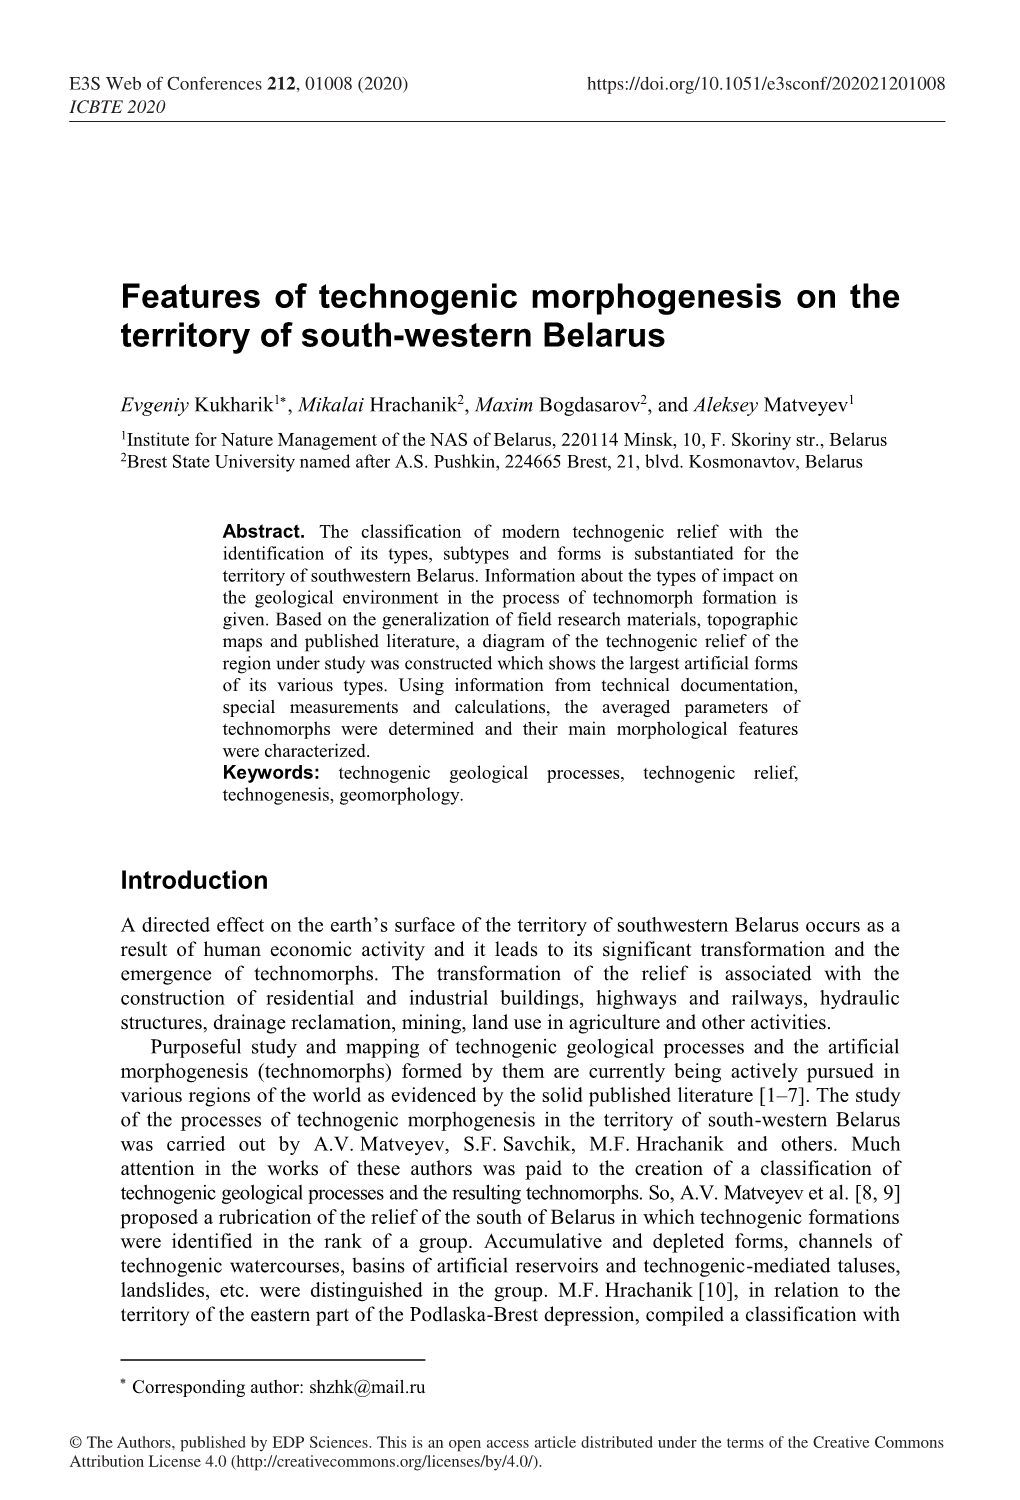 Features of Technogenic Morphogenesis on the Territory of South-Western Belarus